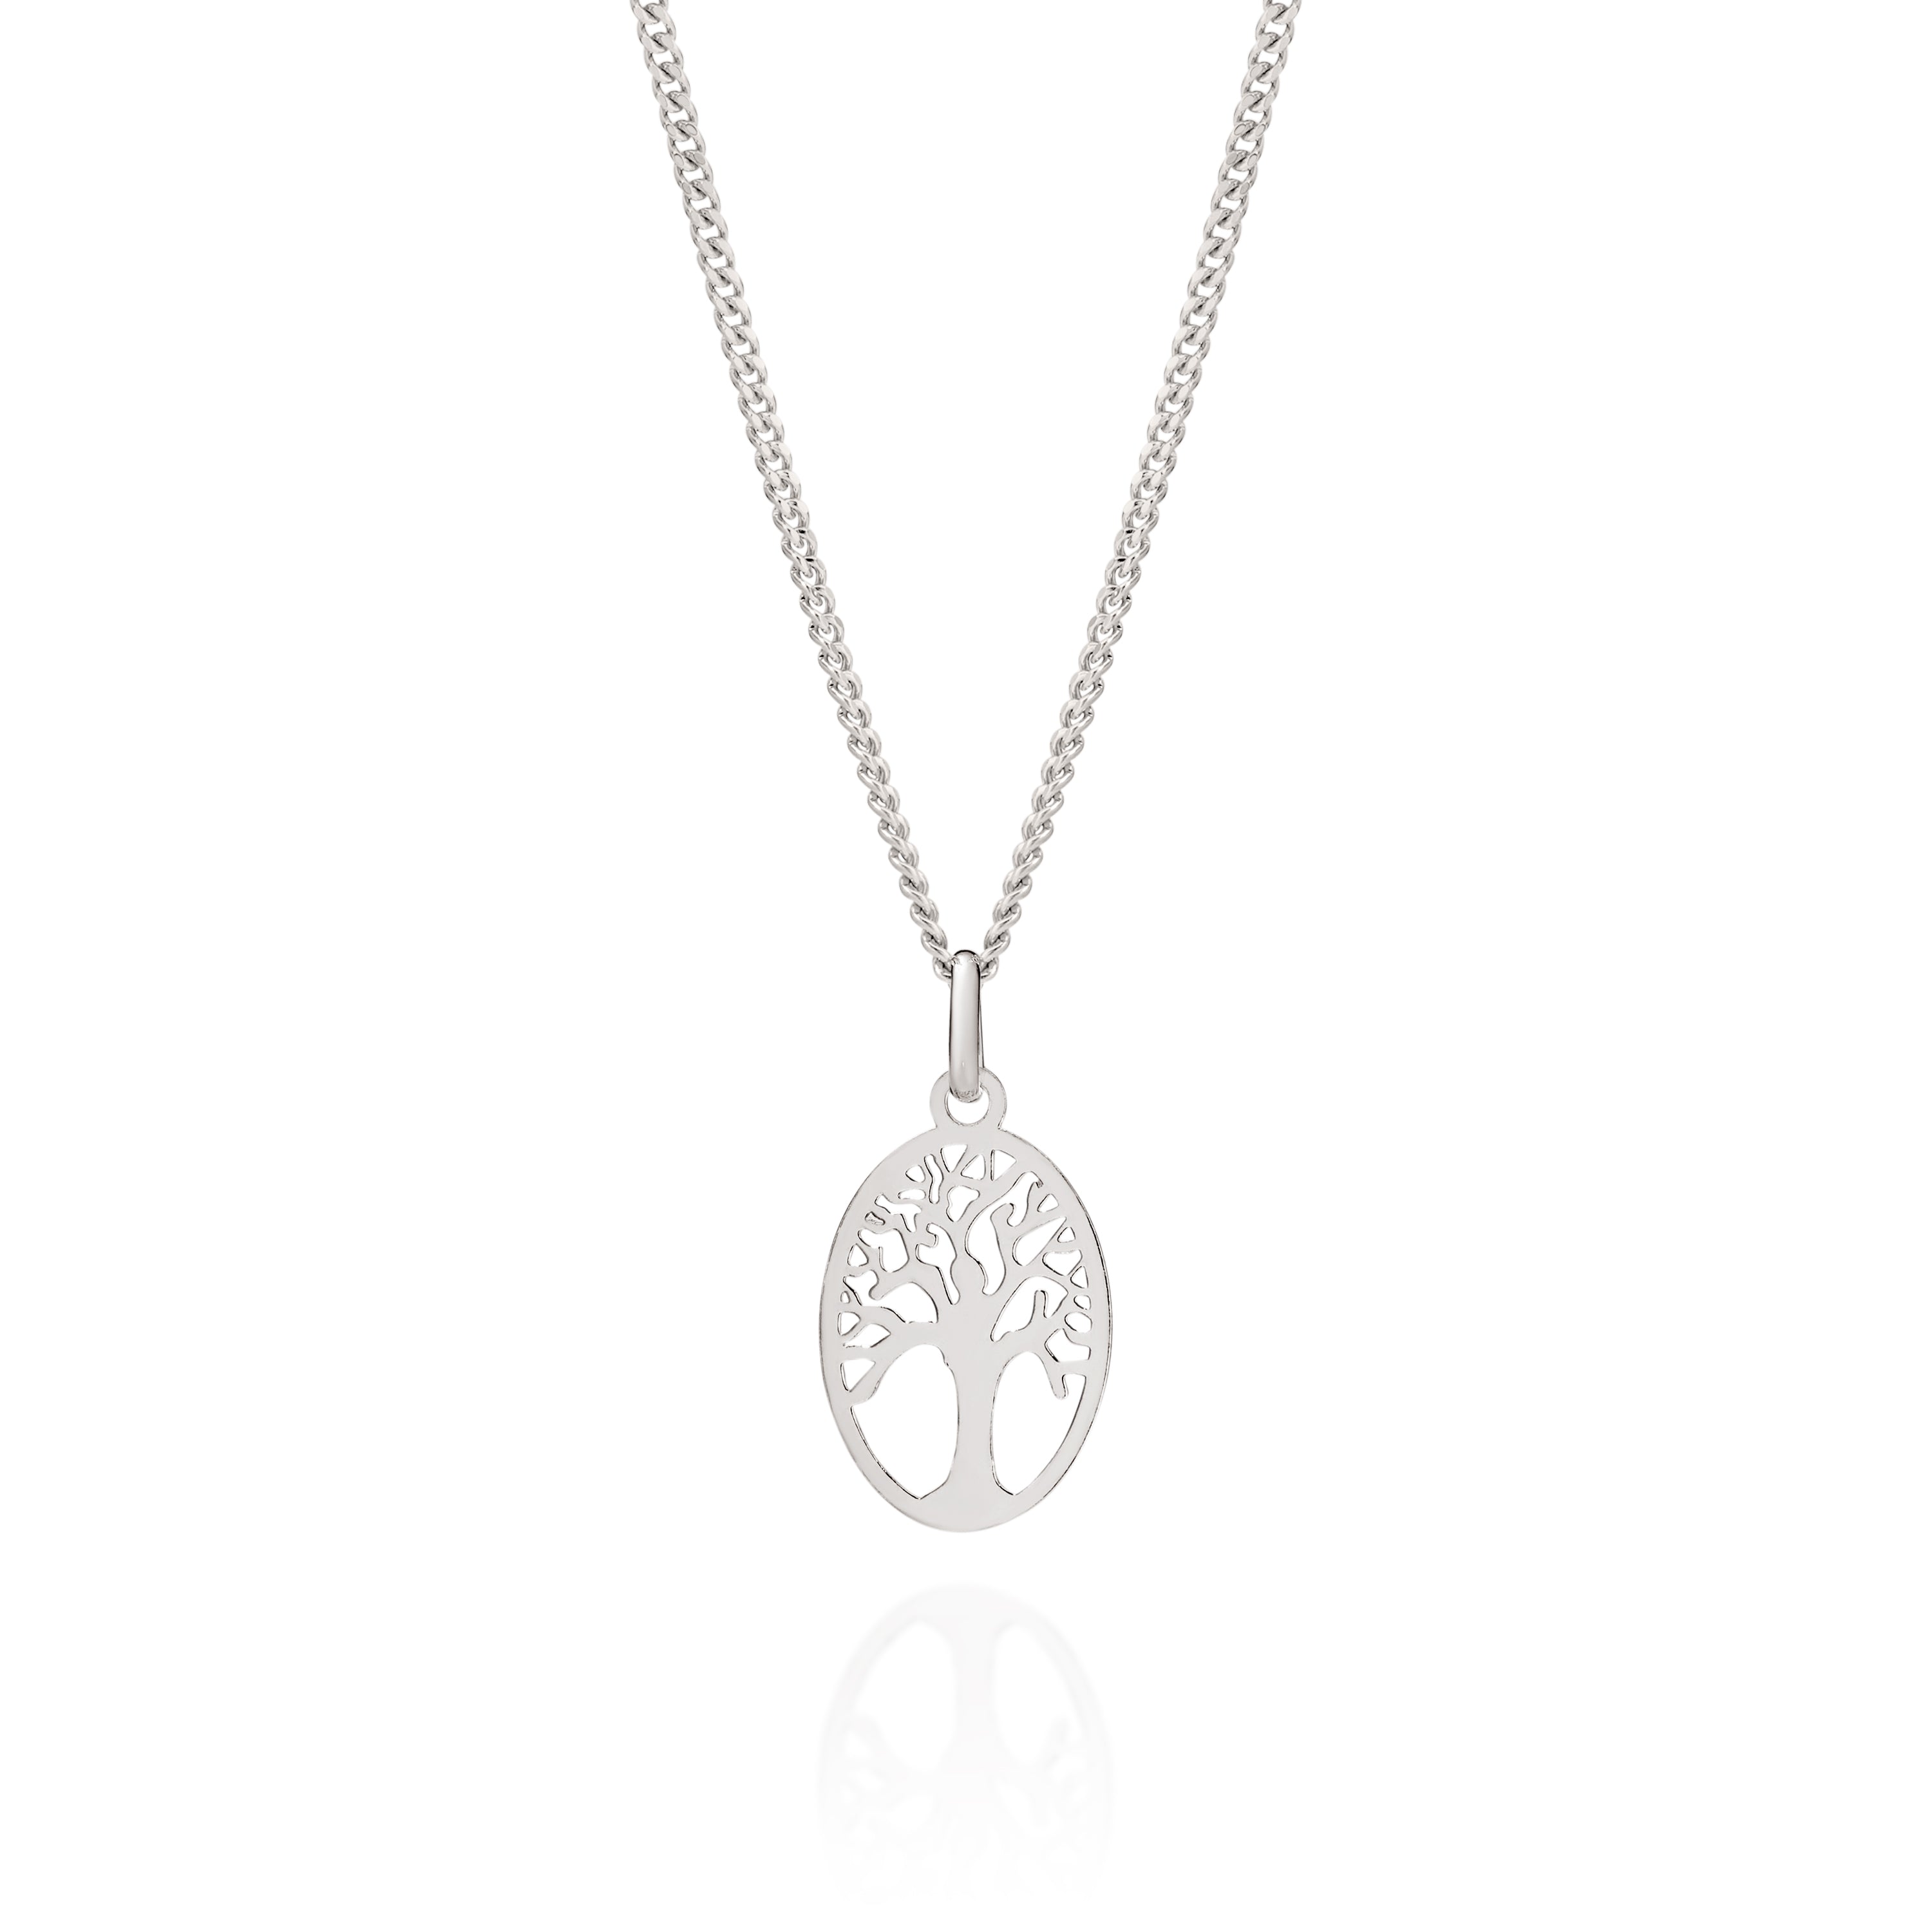 Silver oval tree of life pendant